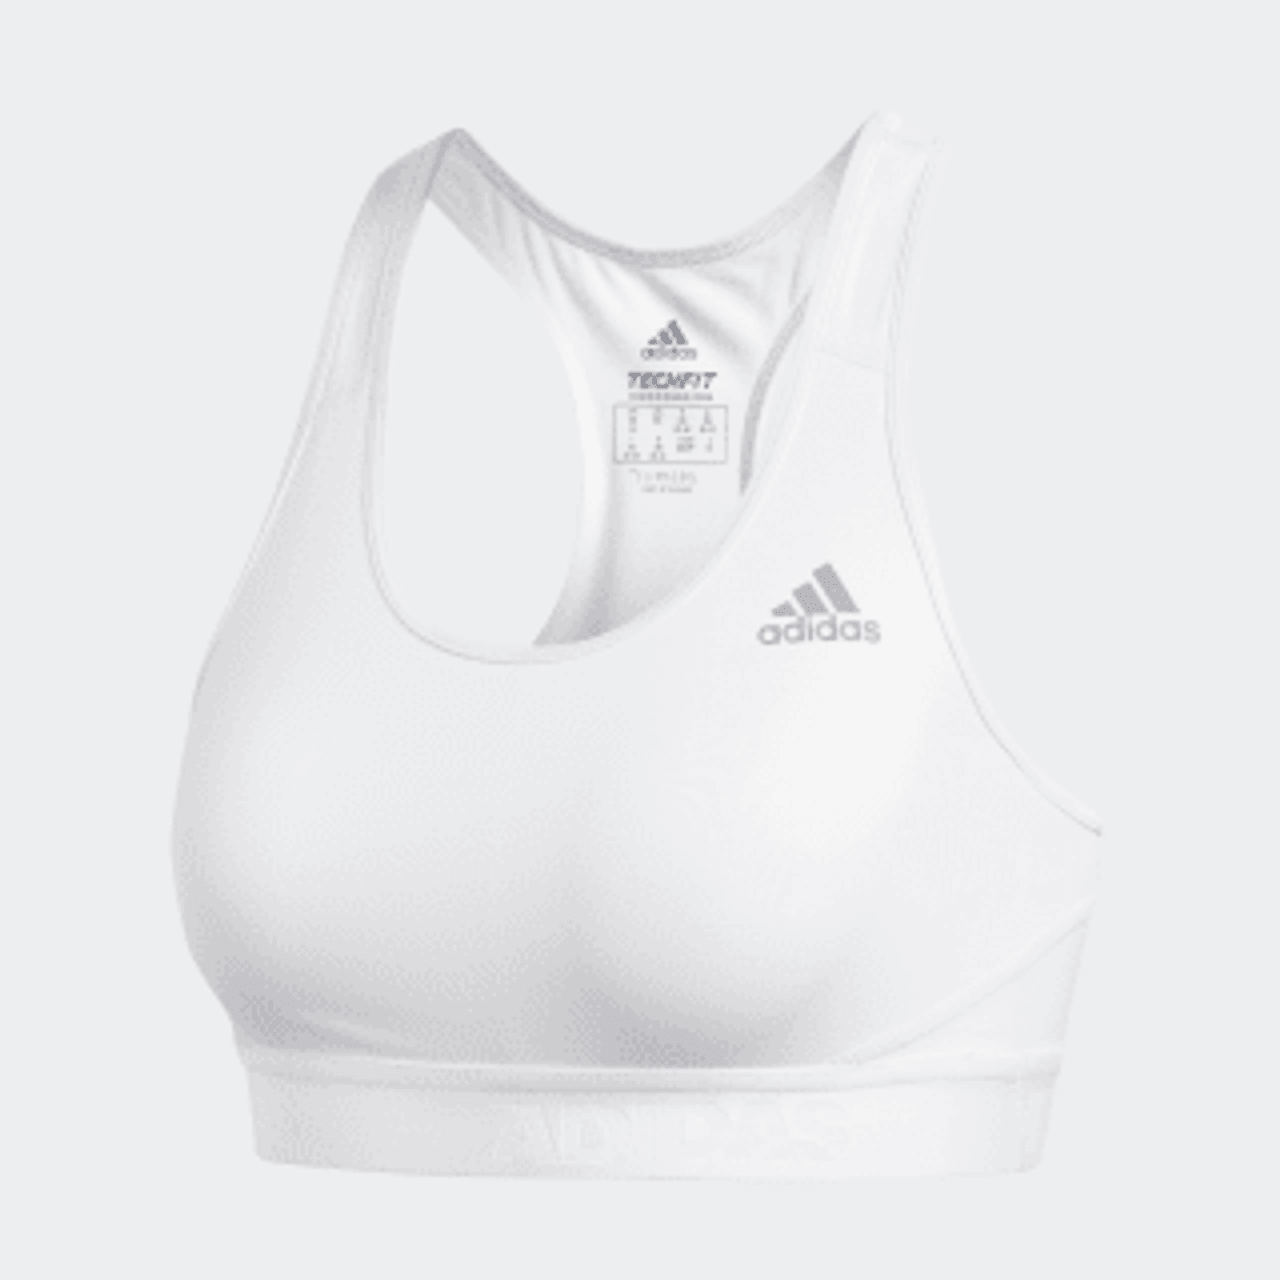 Women's Size Small Adidas White Sports Bra for Sale in Adelaide, CA -  OfferUp